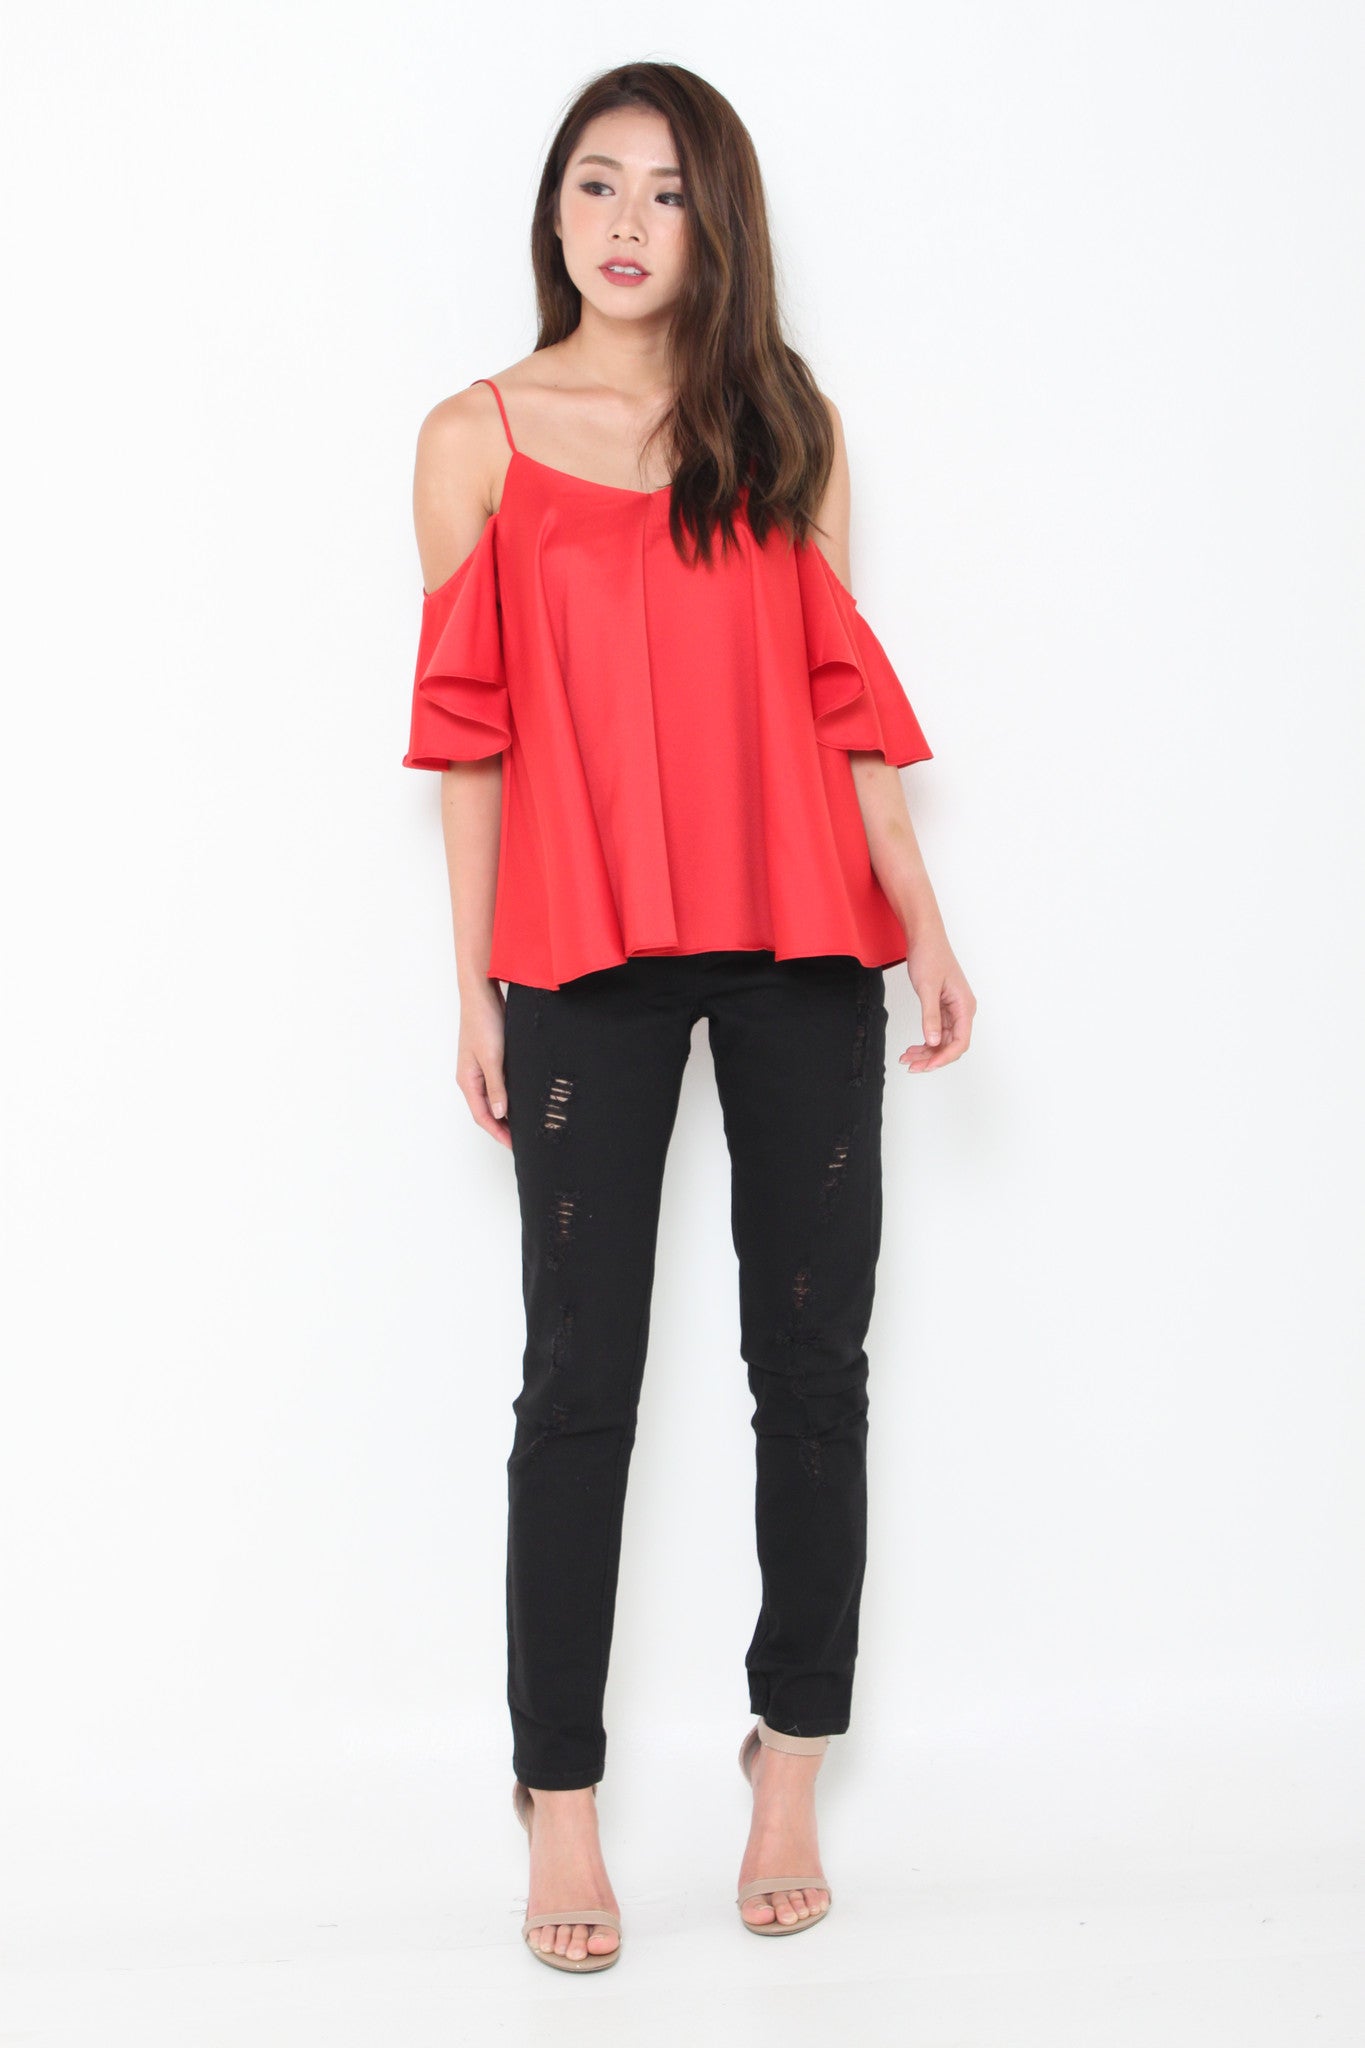 Lolita Ruffle Cold Shoulder Top in Red